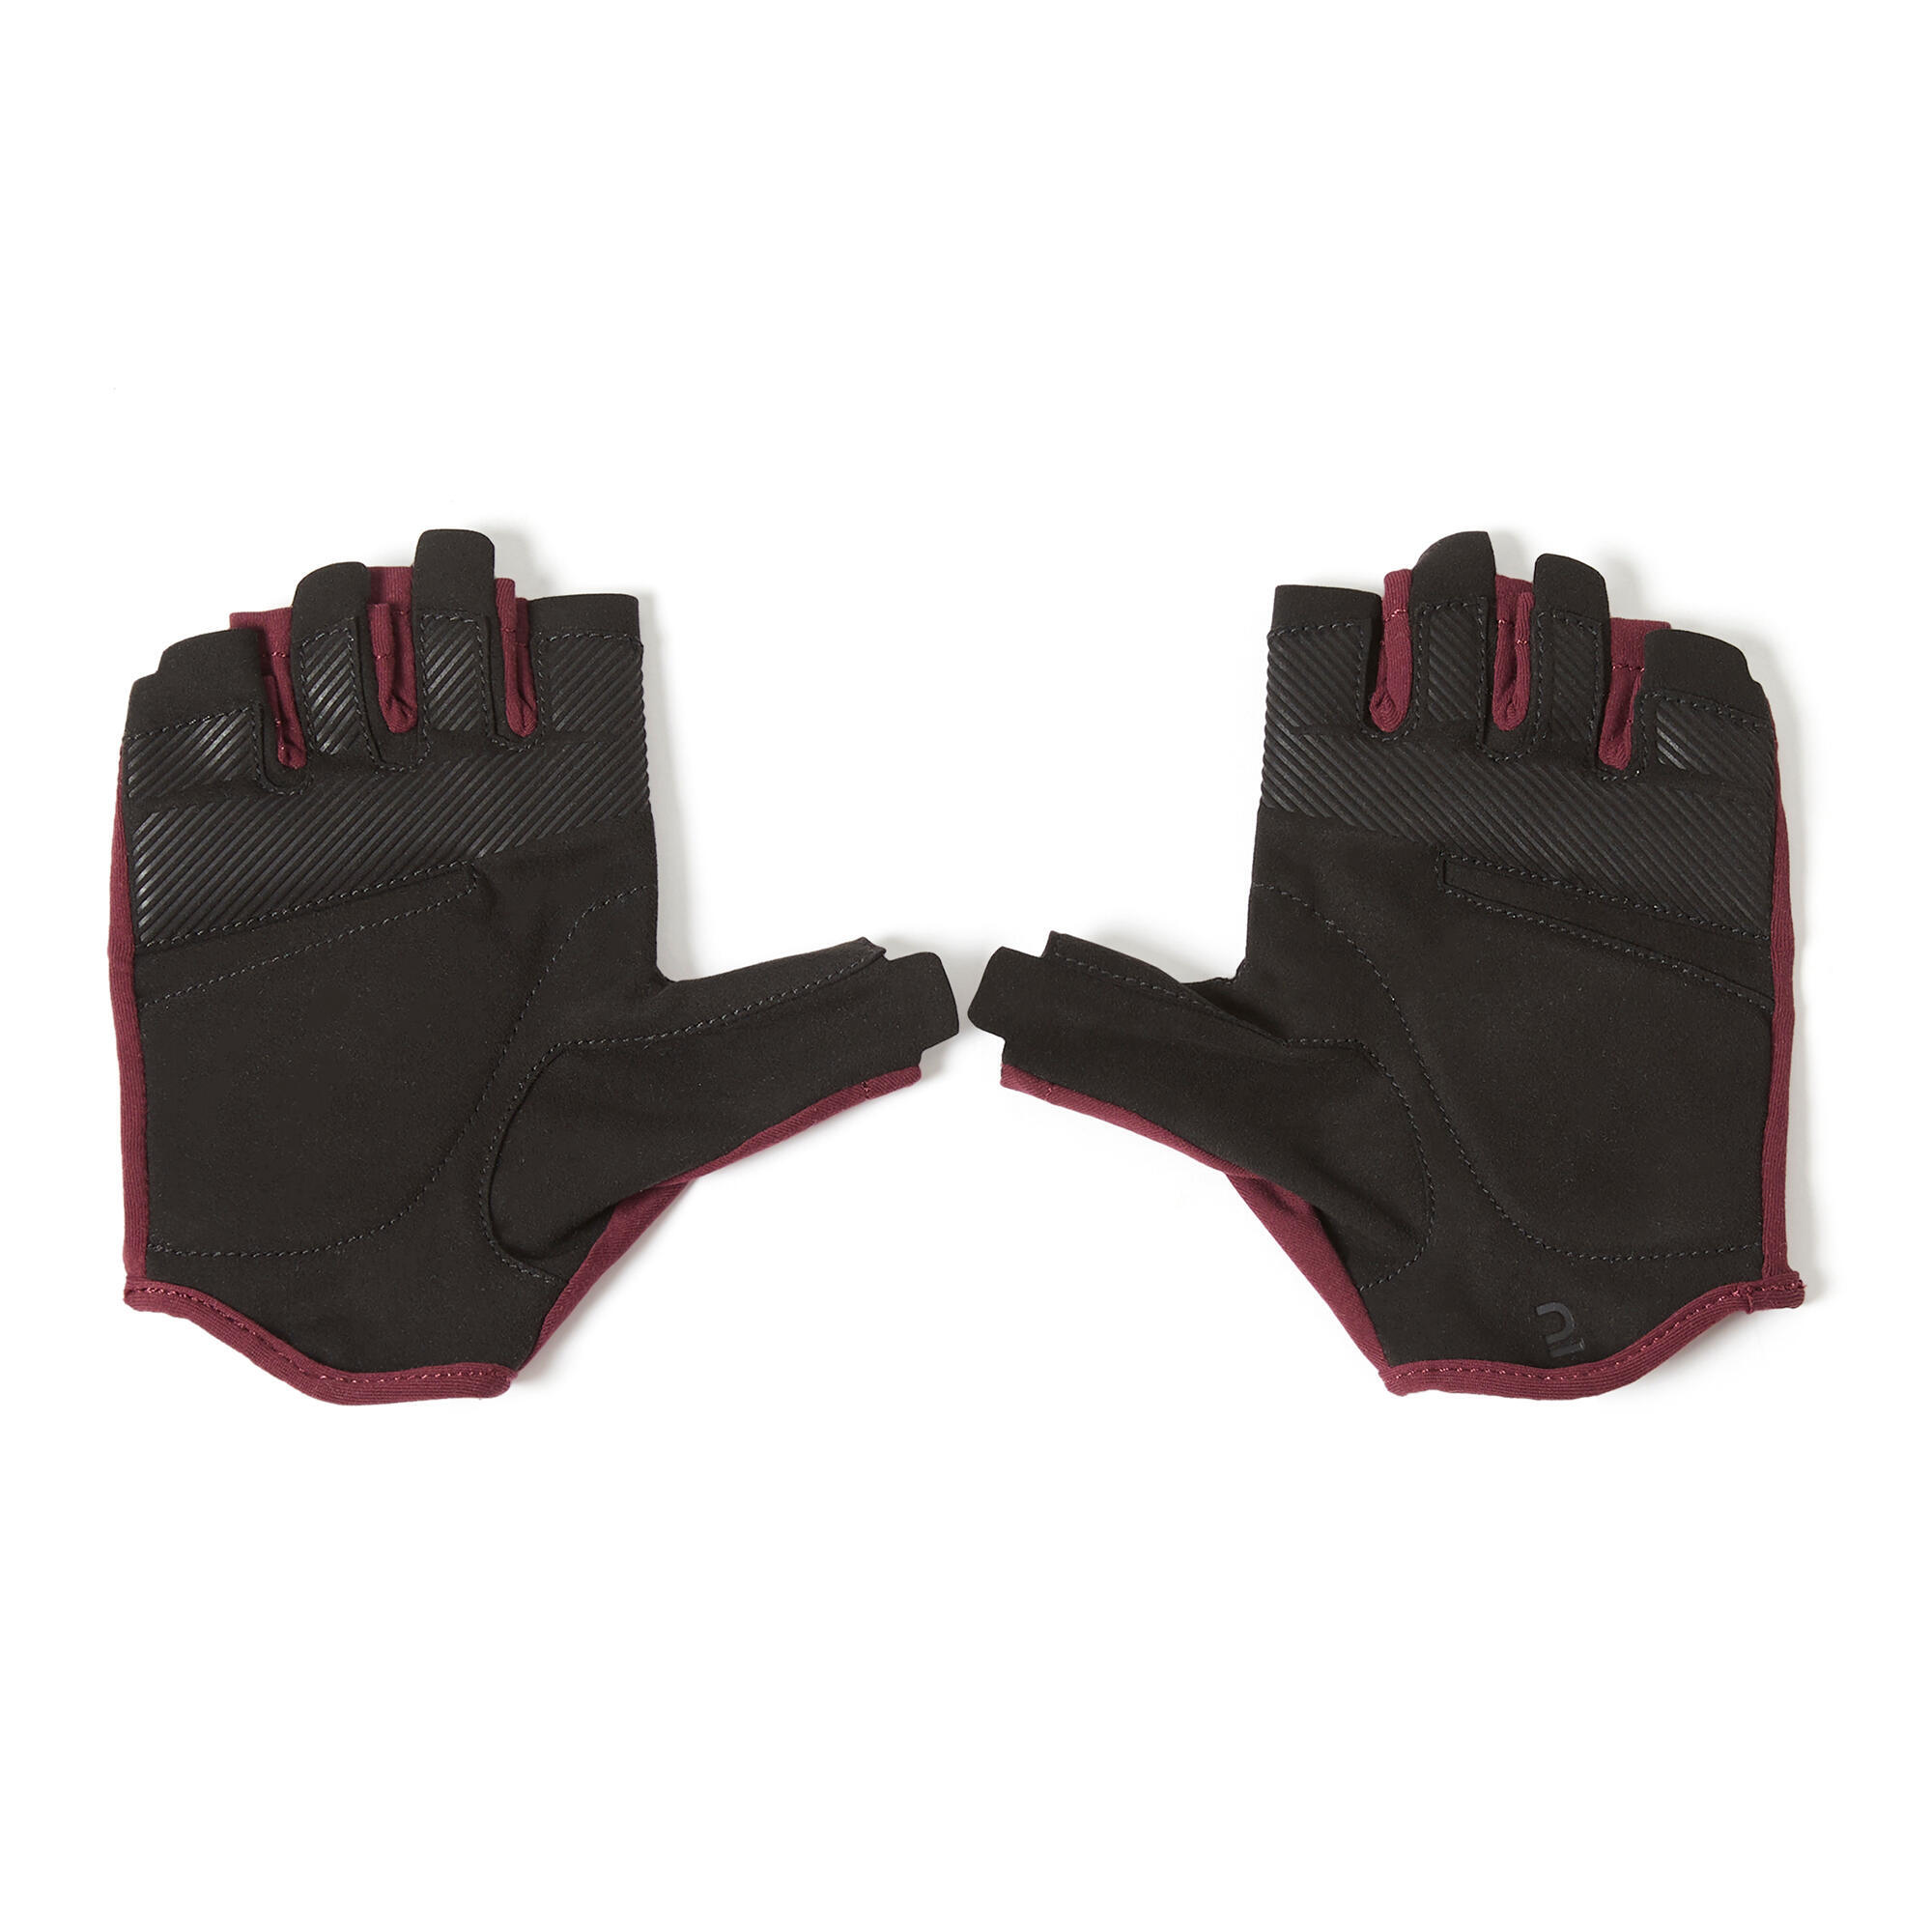 Women's Breathable Weight Training Gloves - Burgundy 3/4